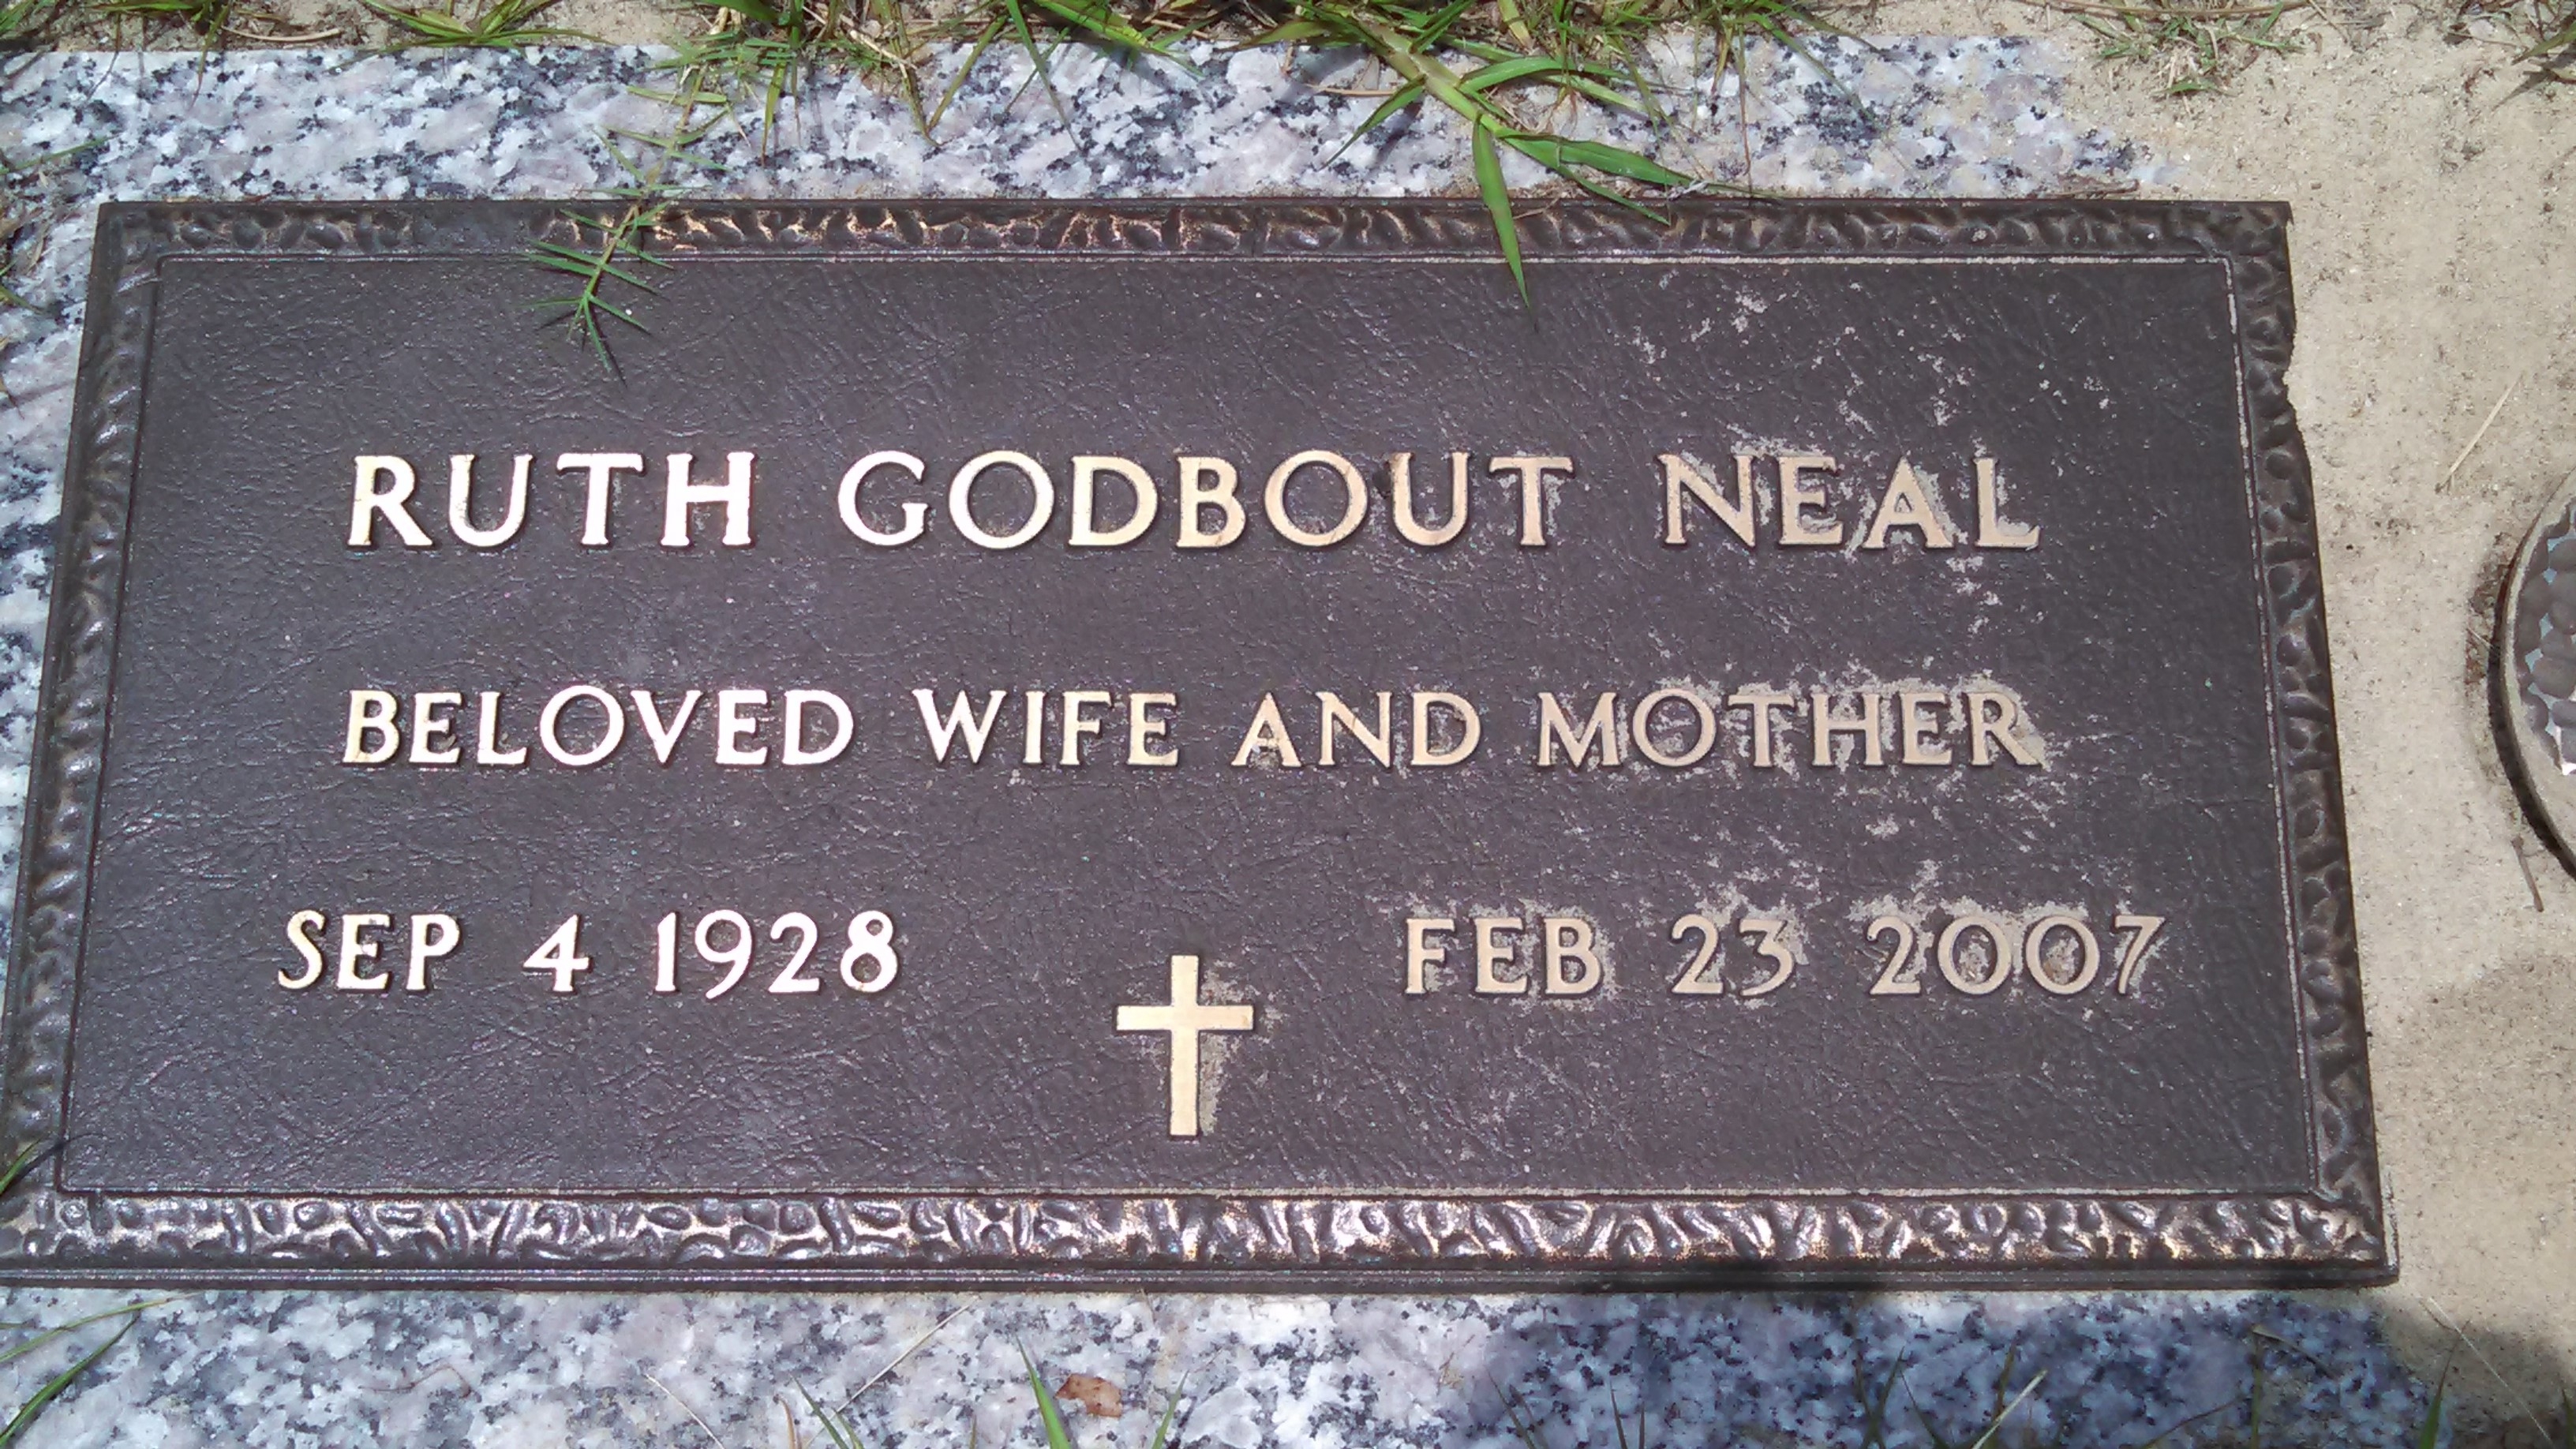 Ruth Godbout Neal grave